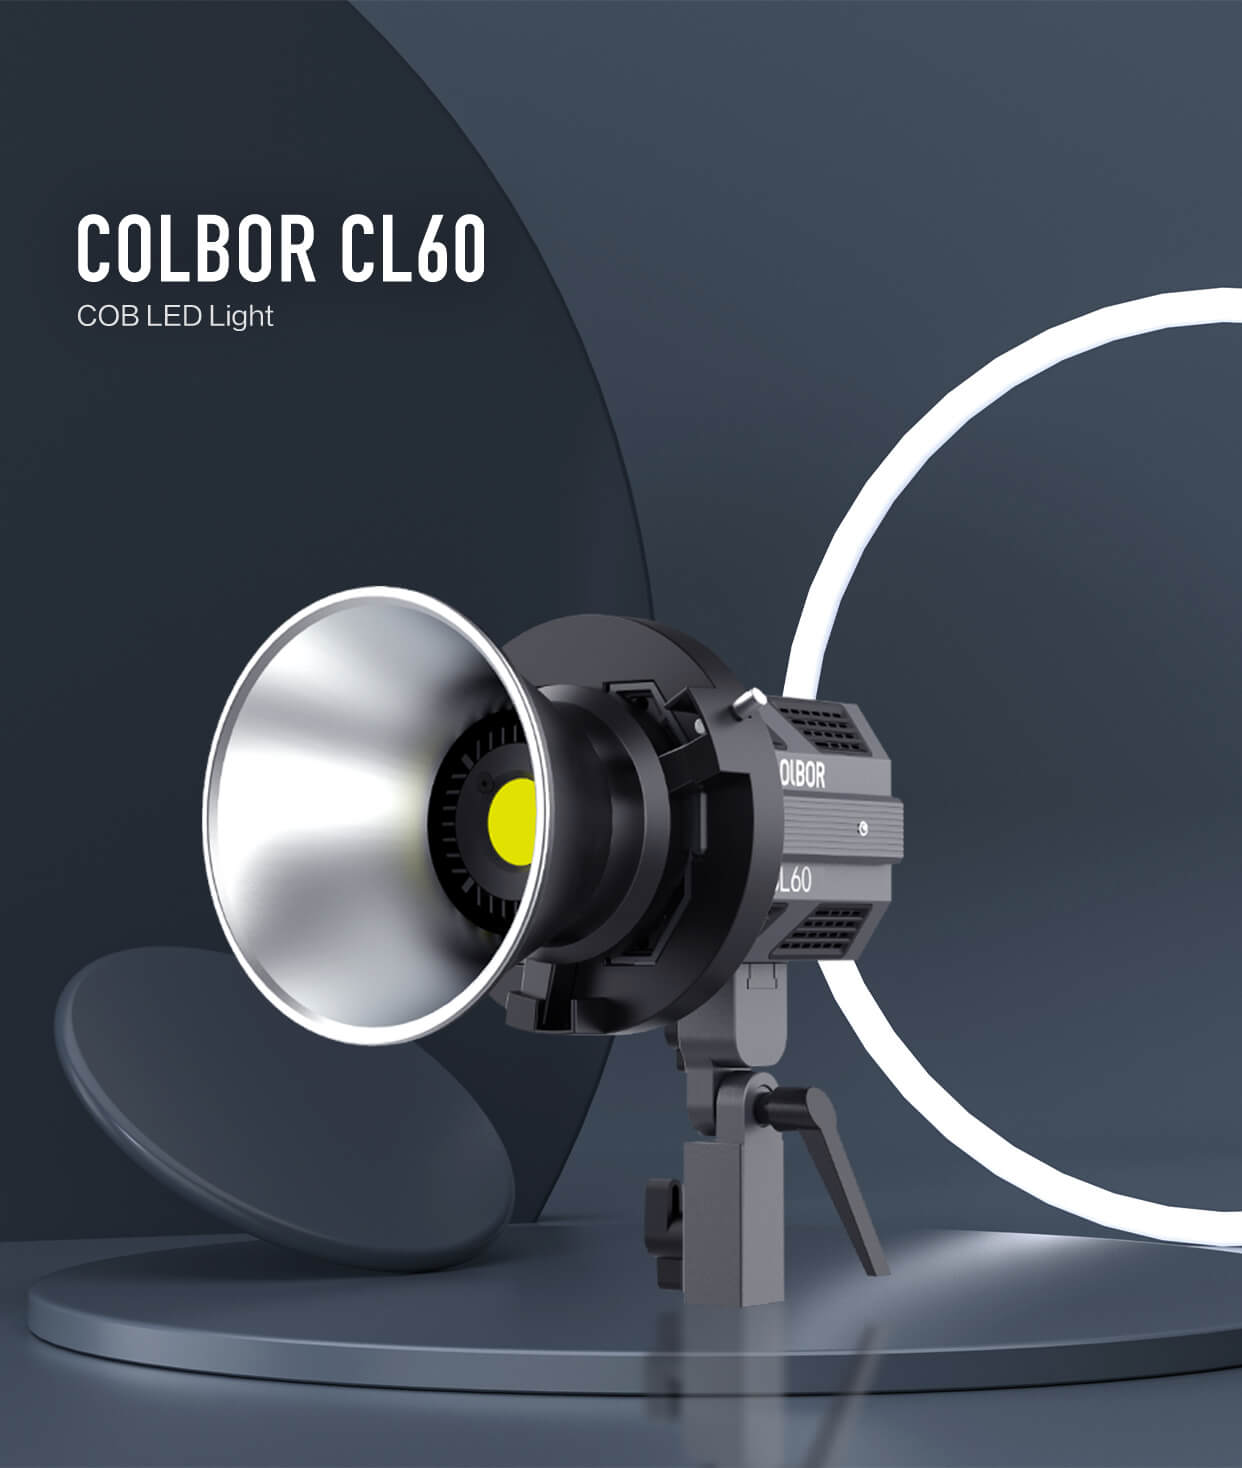 Video Light, COLBOR CL60M Studio Lights 65W 5600K CRI97+ Continuous Output Lighting 7 Light Effects with Bowens Mount APP Control Spotlight for Video Recording, Video-Light-LED-Photography-Lighting